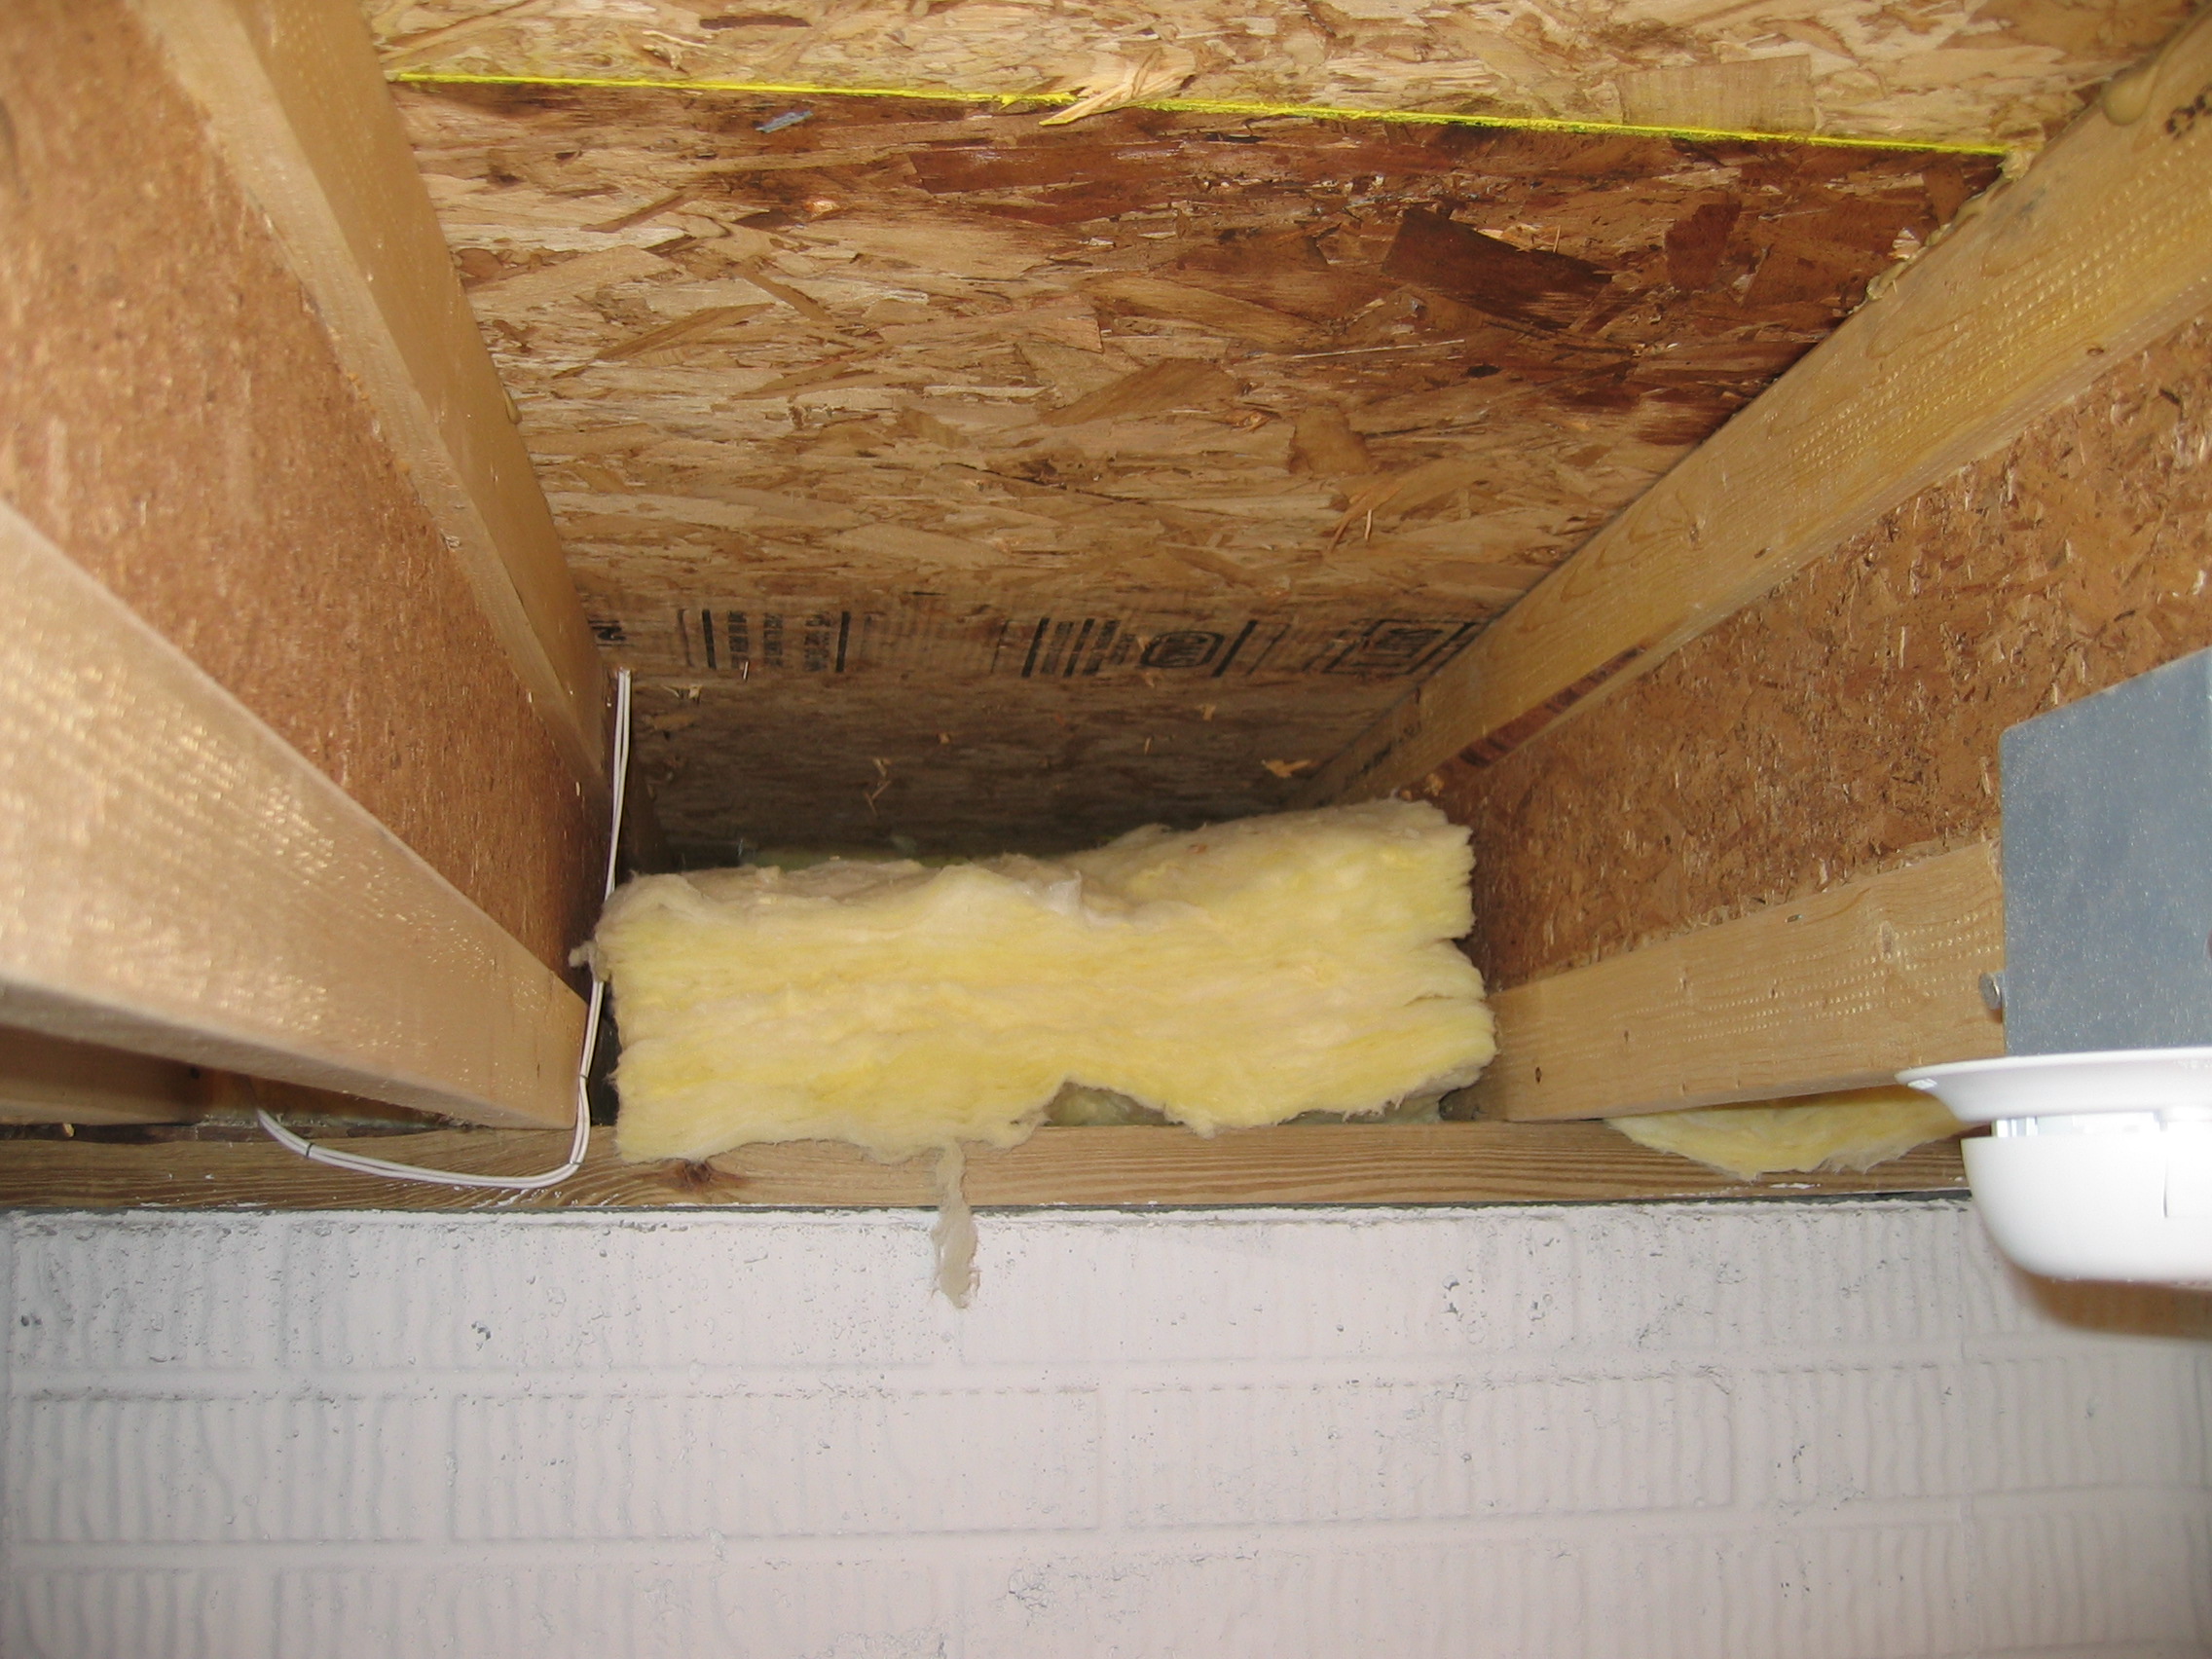 Insulation not aligned with subfloor or joists.